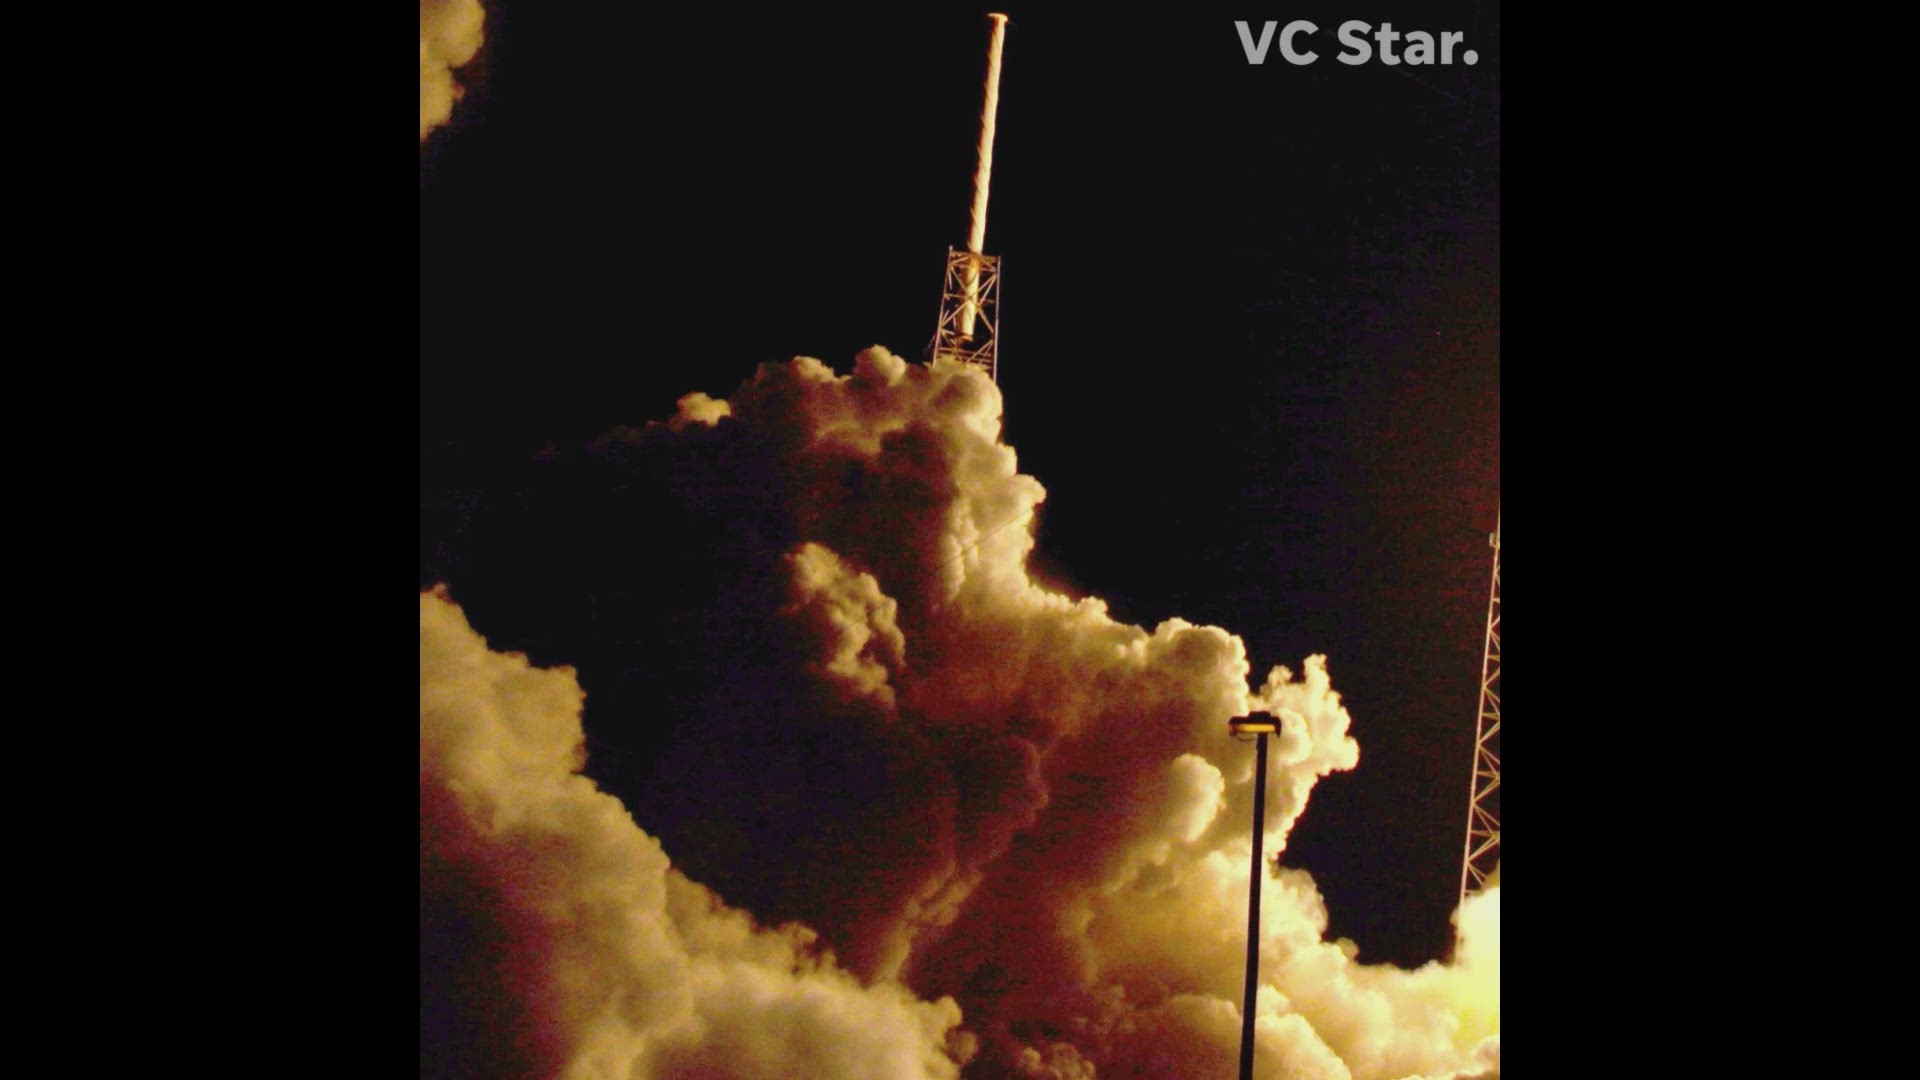 SpaceX will launch the SAOCOM 1A from Vandenberg Air Force Base, and Ventura County residents could see the rocket plume and hear sonic booms. Steve Byerly, Ventura County Star